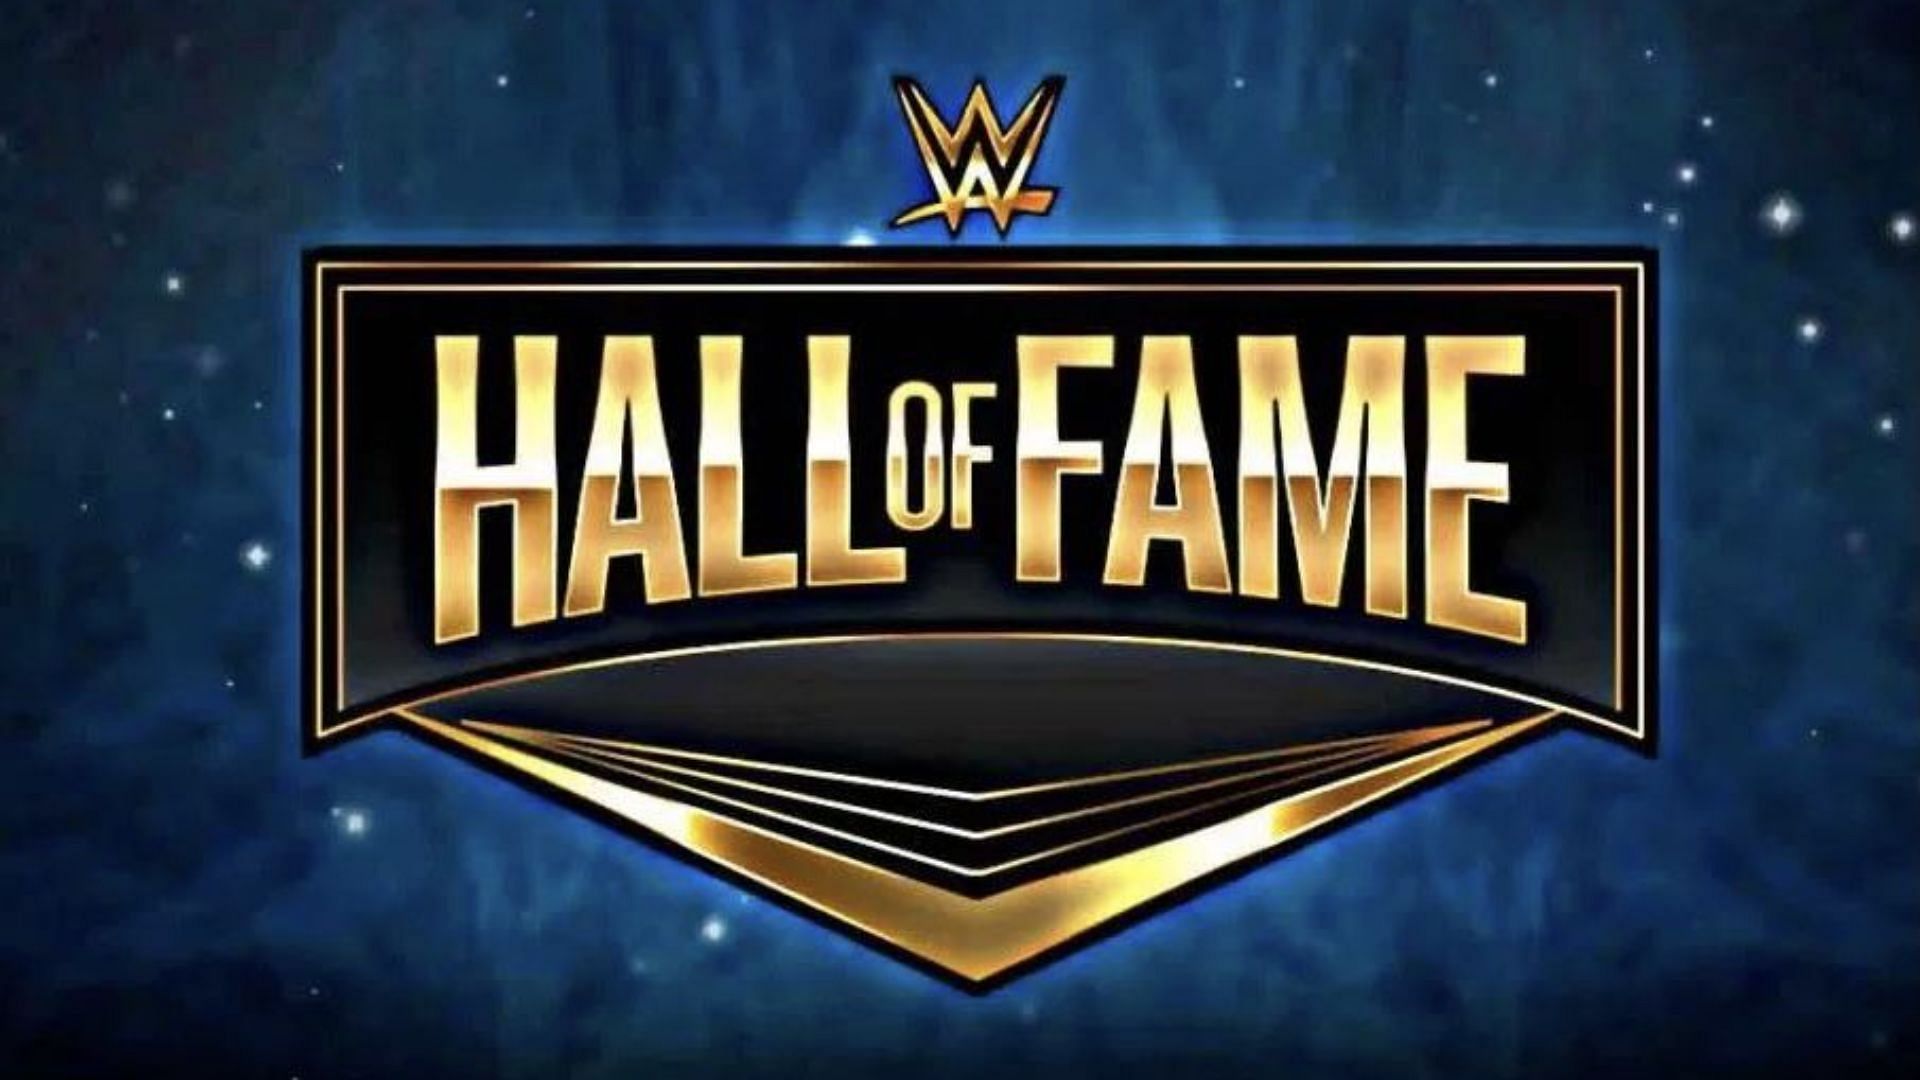 Come explore the WWE Hall of Fame with us